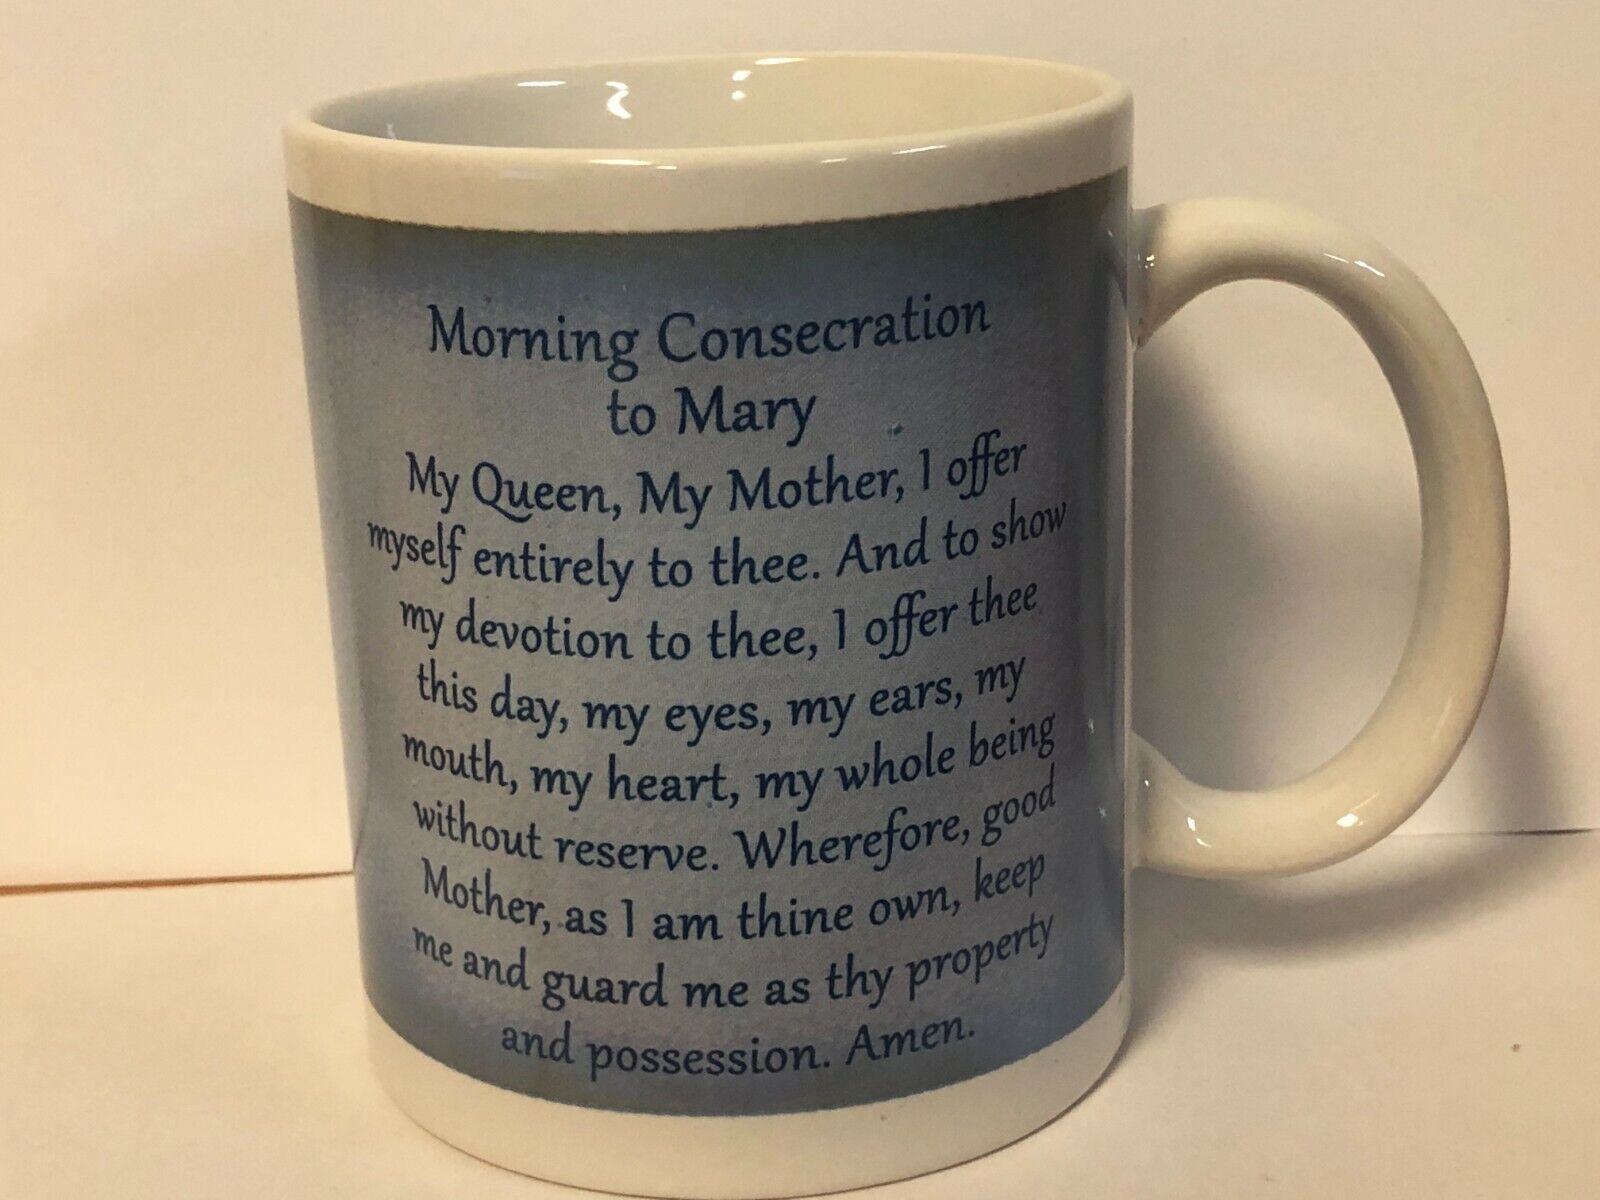 Blessed Mother 10 oz Cup/Mug, With Morning Consecration Prayer, New - Bob and Penny Lord